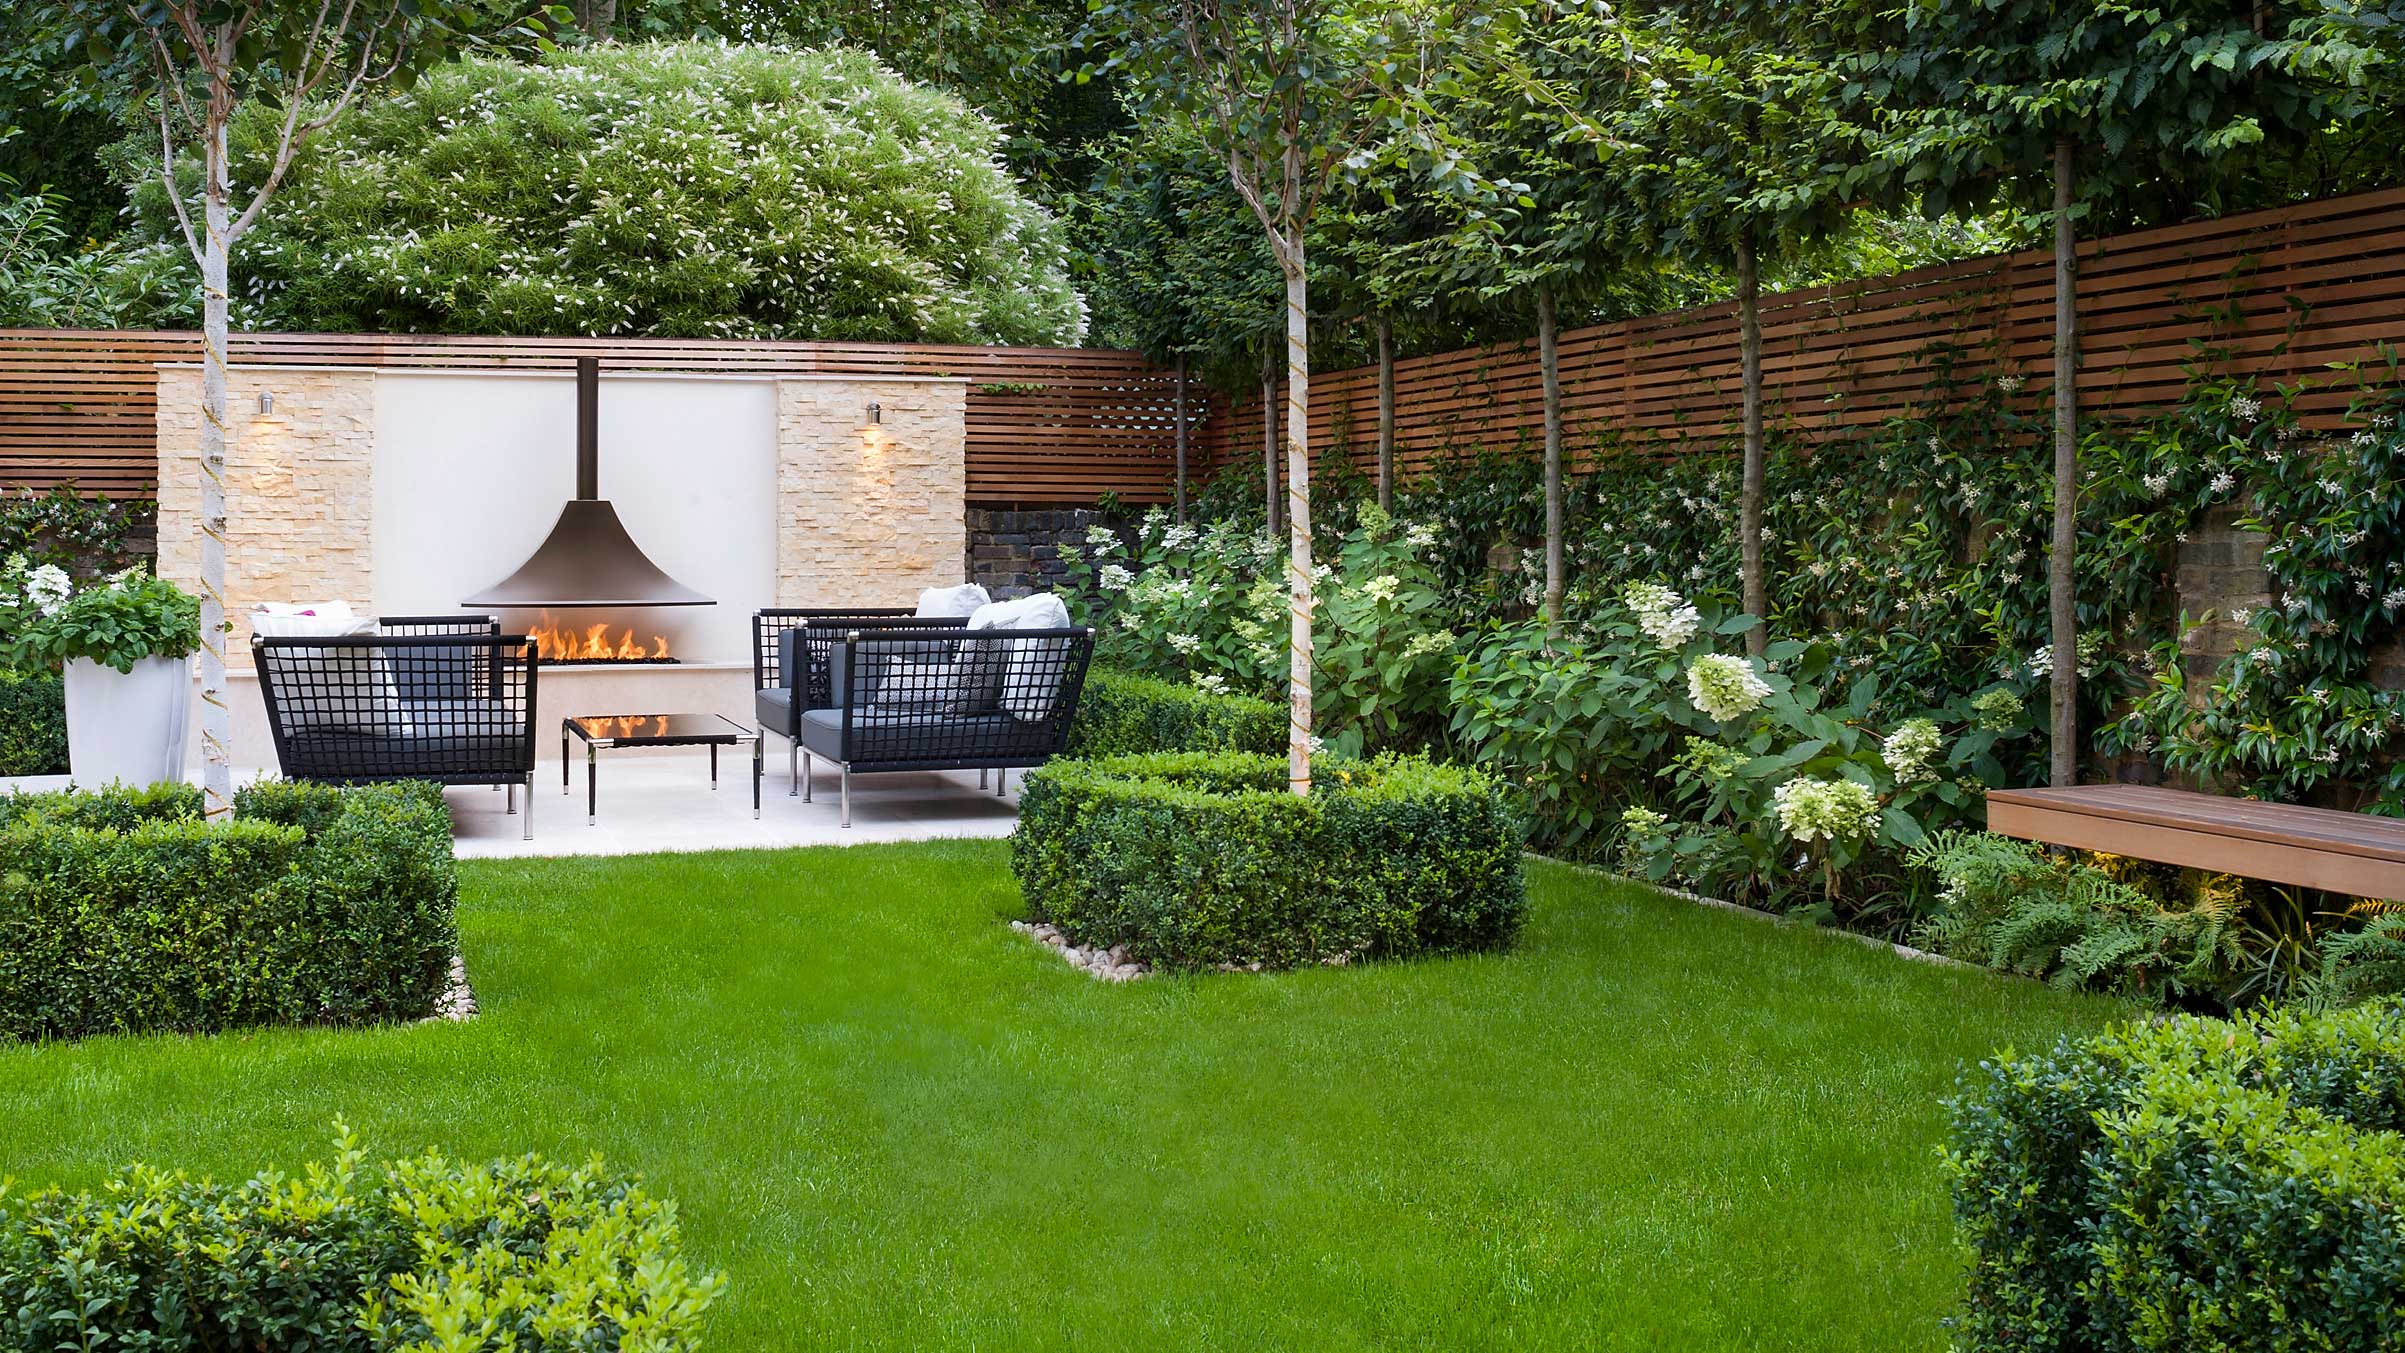 luxurious backyard landscaping ideas with fancy pool